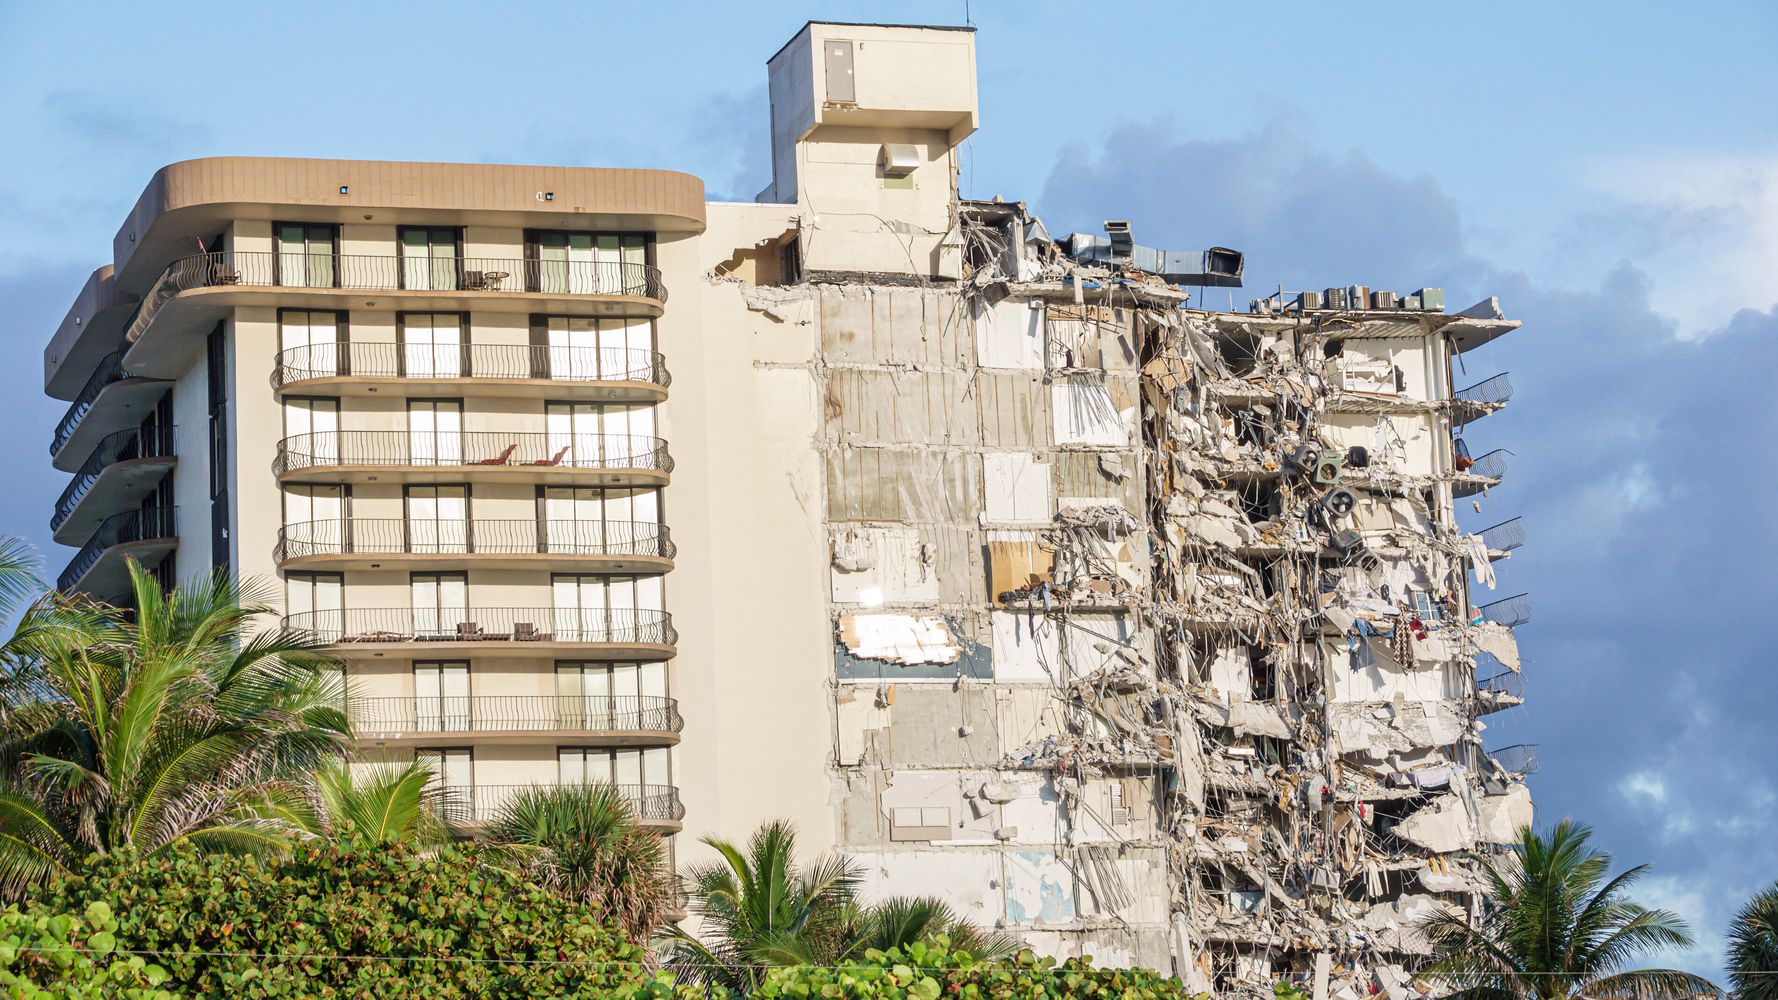 2018 Report Detailed 'Major Structural Damage' To Florida Condo That Collapsed